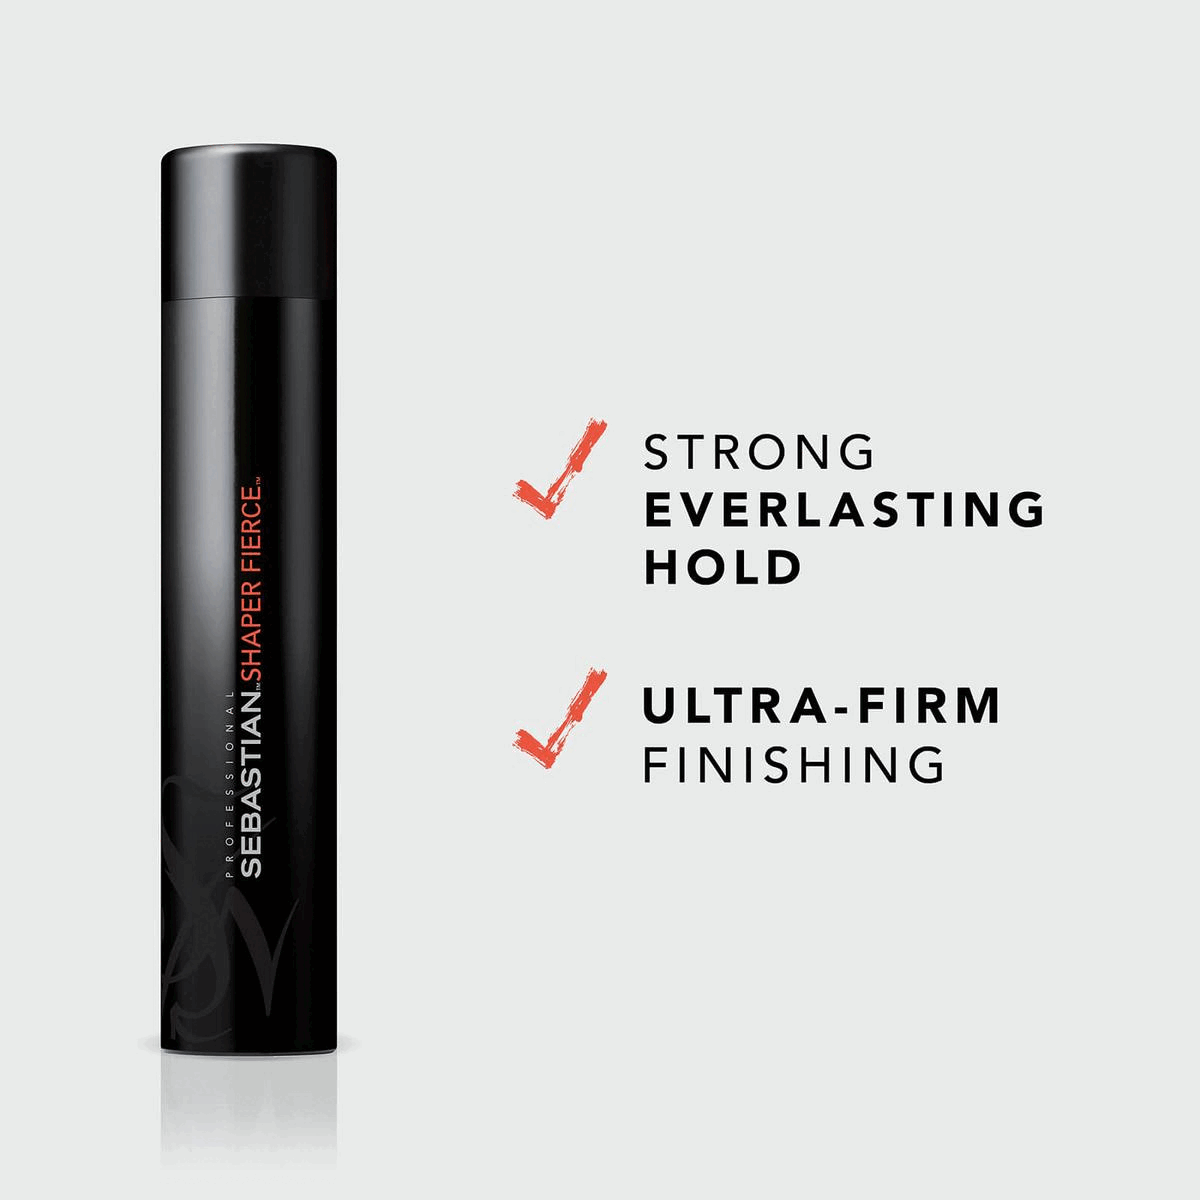 Image 1-Strong everlasting hold,Ultra-firm finishing. Image 2- How to use, Spray over dry hair, Layer throughout the styling process. Image 3- Ultra-firm finish. Image 4-Challenge find your style* sold separately. Image 5-For medium & heavy textures.